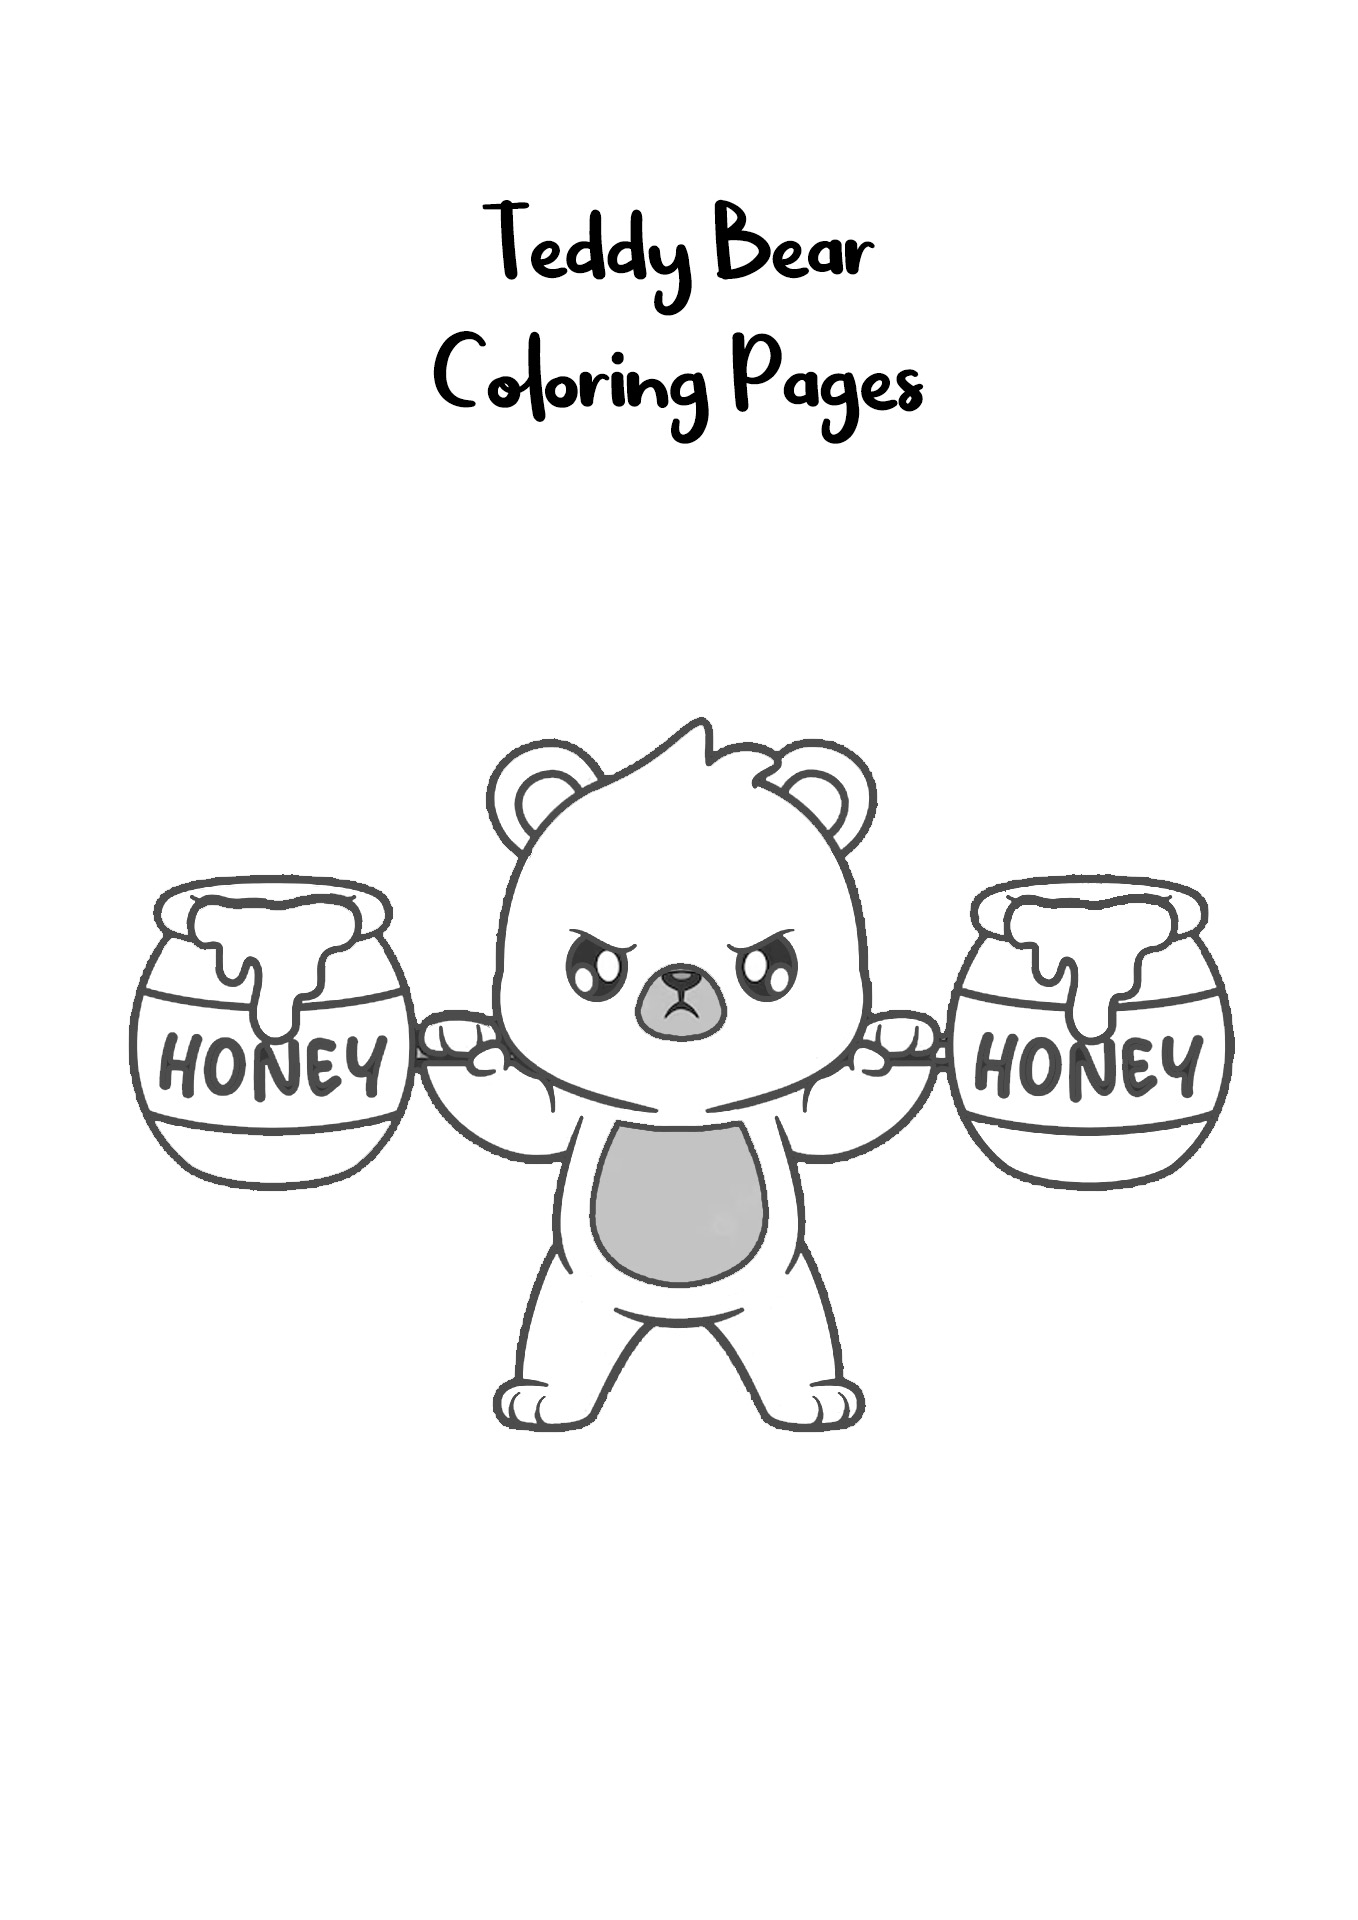 Teddy Bear Coloring Pages Image